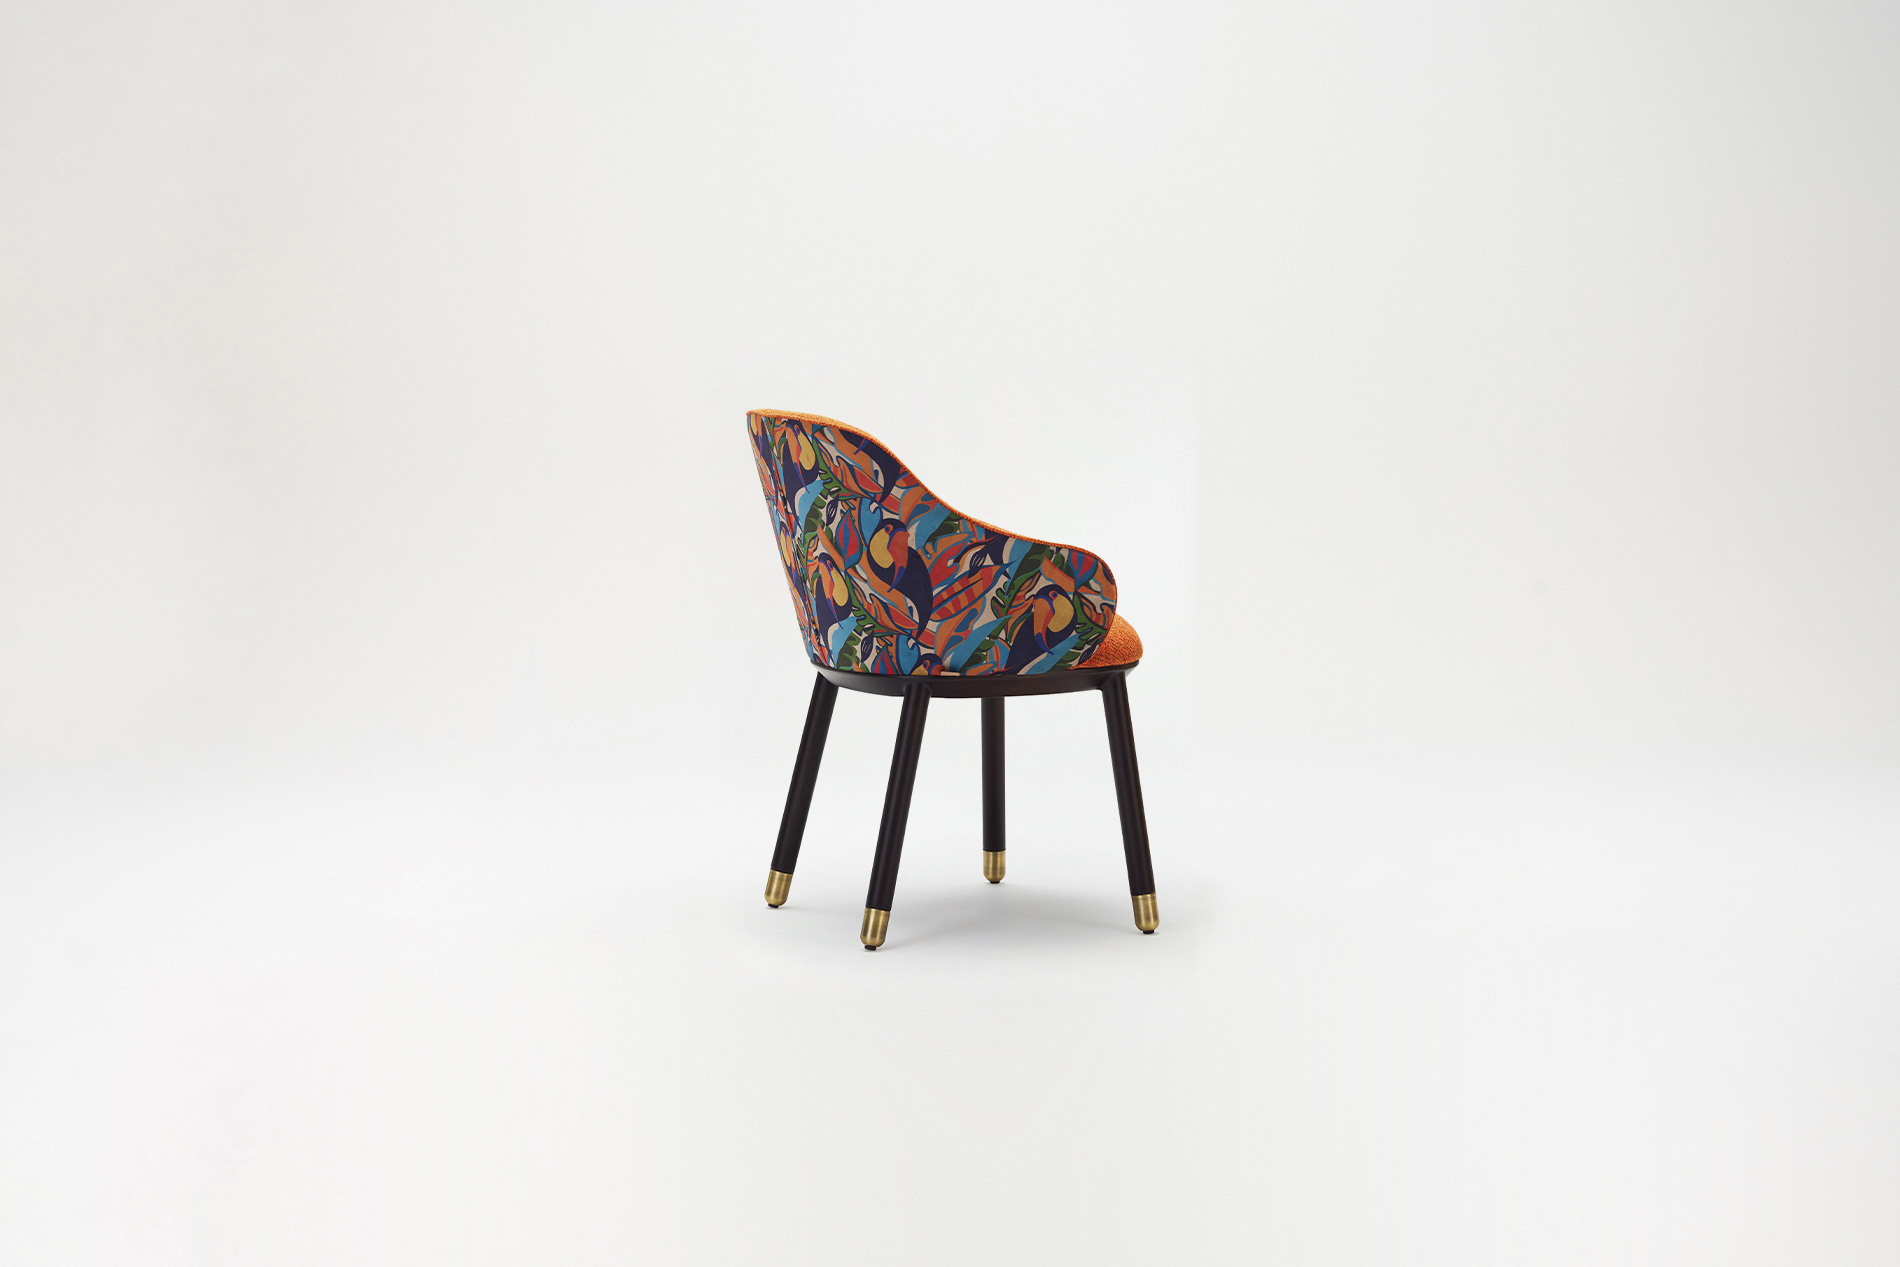 Ankara's chairs tell a tale of serene elegance, a waltz spanning from history to the promising future.ANKARA ARMCHAIR